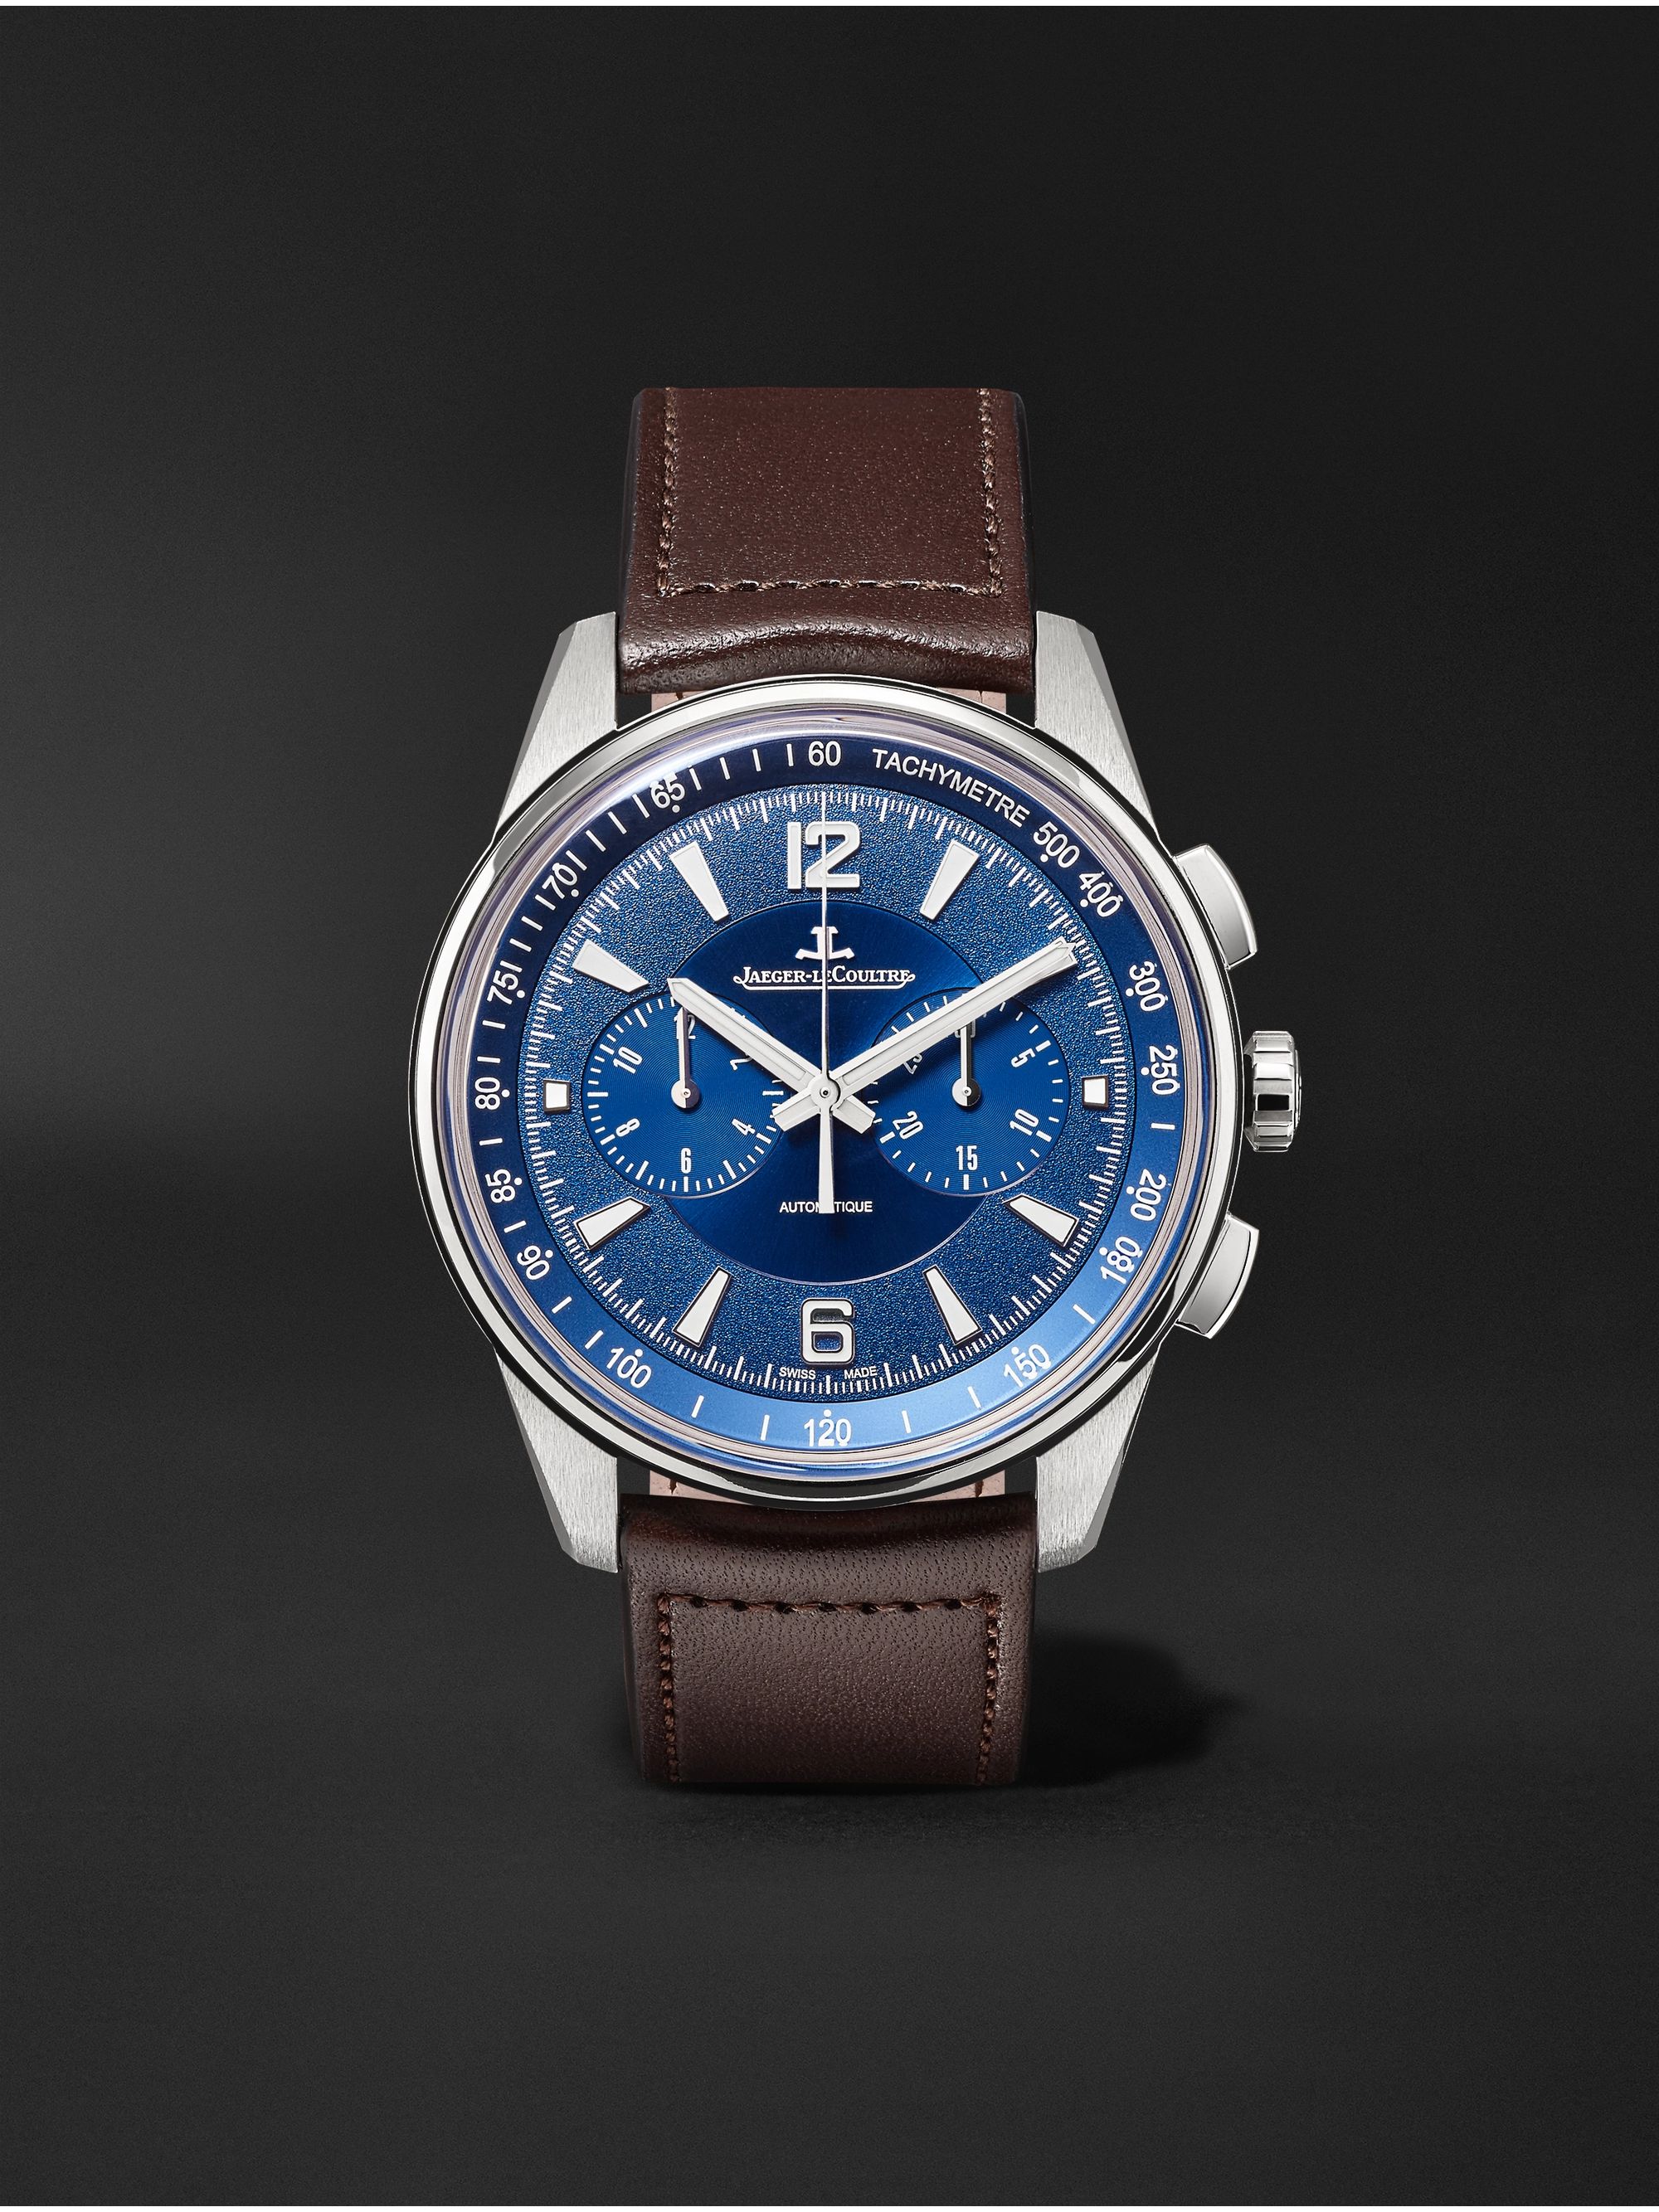 JAEGER-LECOULTRE Polaris Automatic Chronograph 42mm Stainless Steel and Leather Watch, Ref. No. 9028480